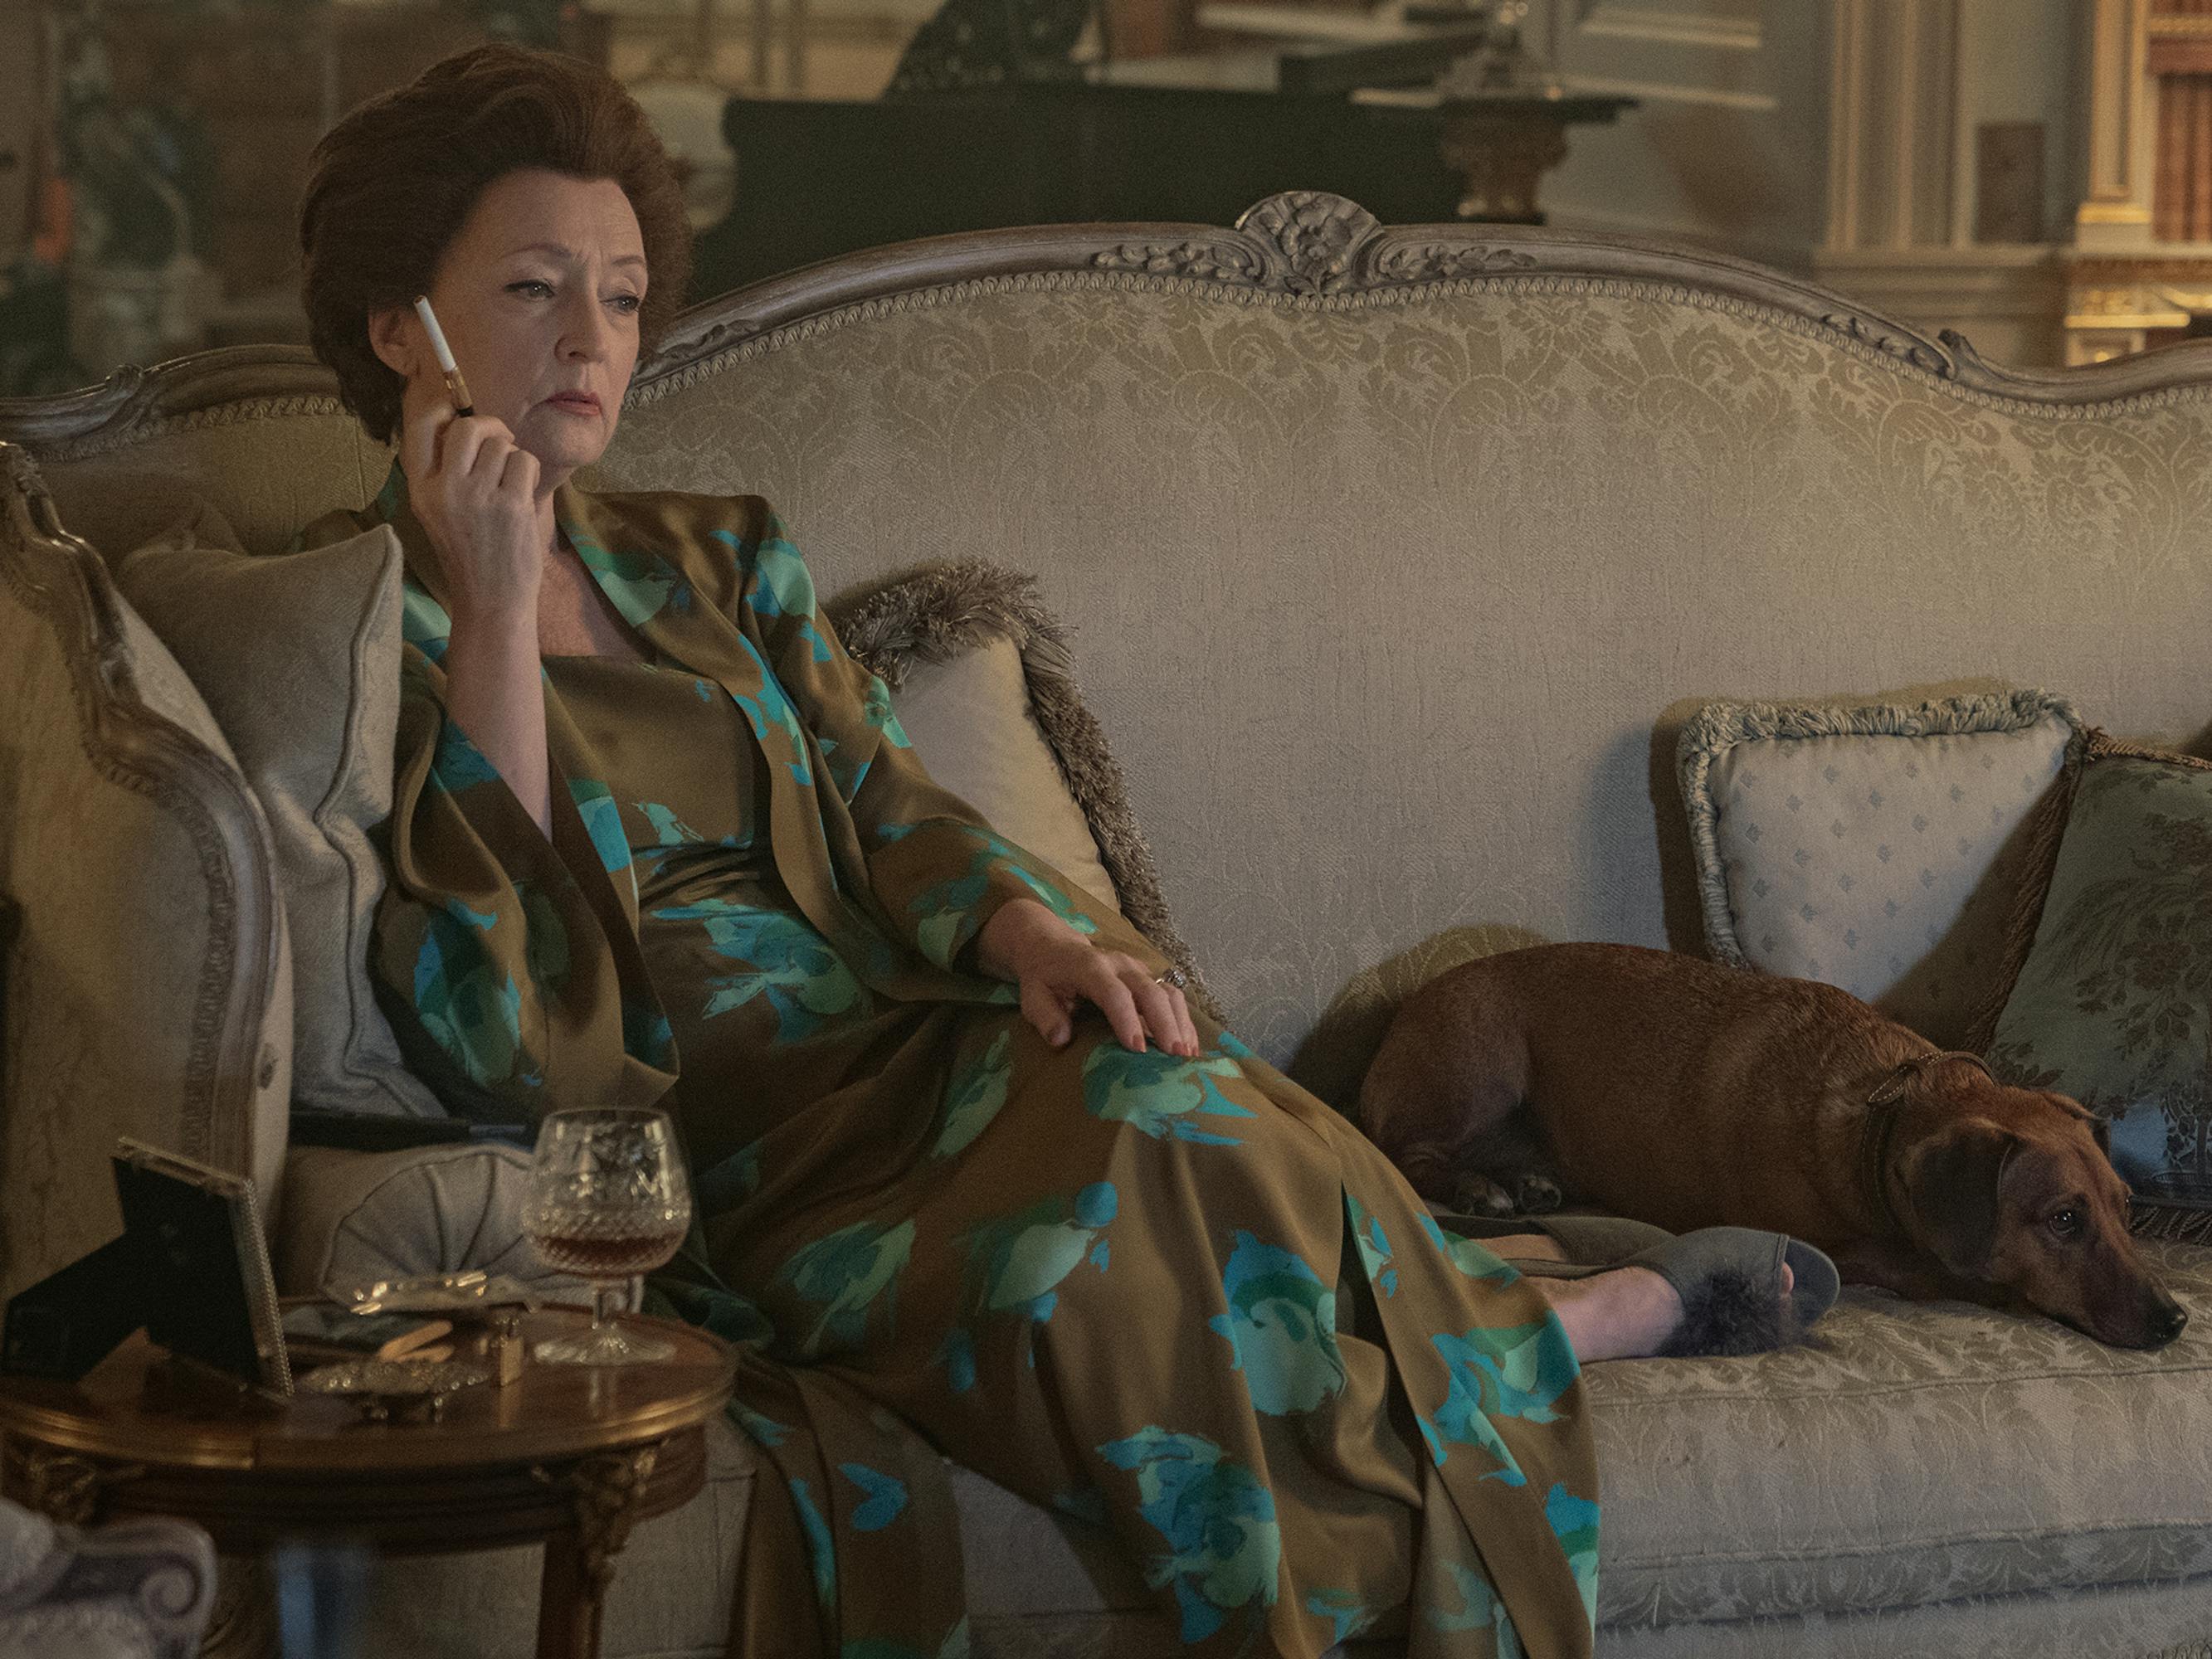 Princess Margaret (Lesley Manville) wears a patterned dress and sits on a couch with a brown dog.